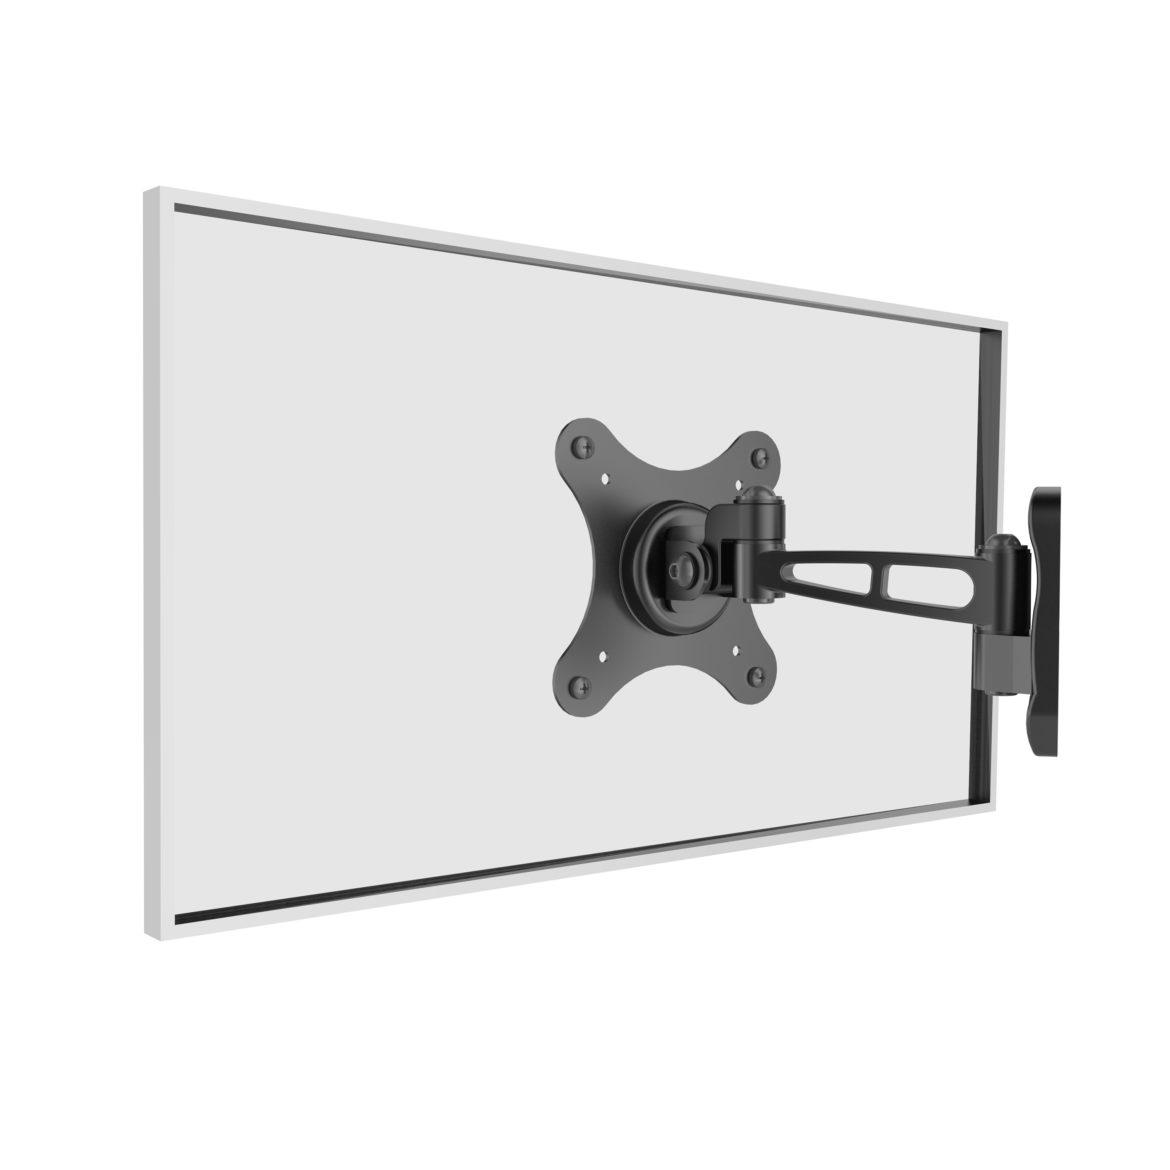 TMO LA100-M - Full motion TV wall mount with long articulating arm